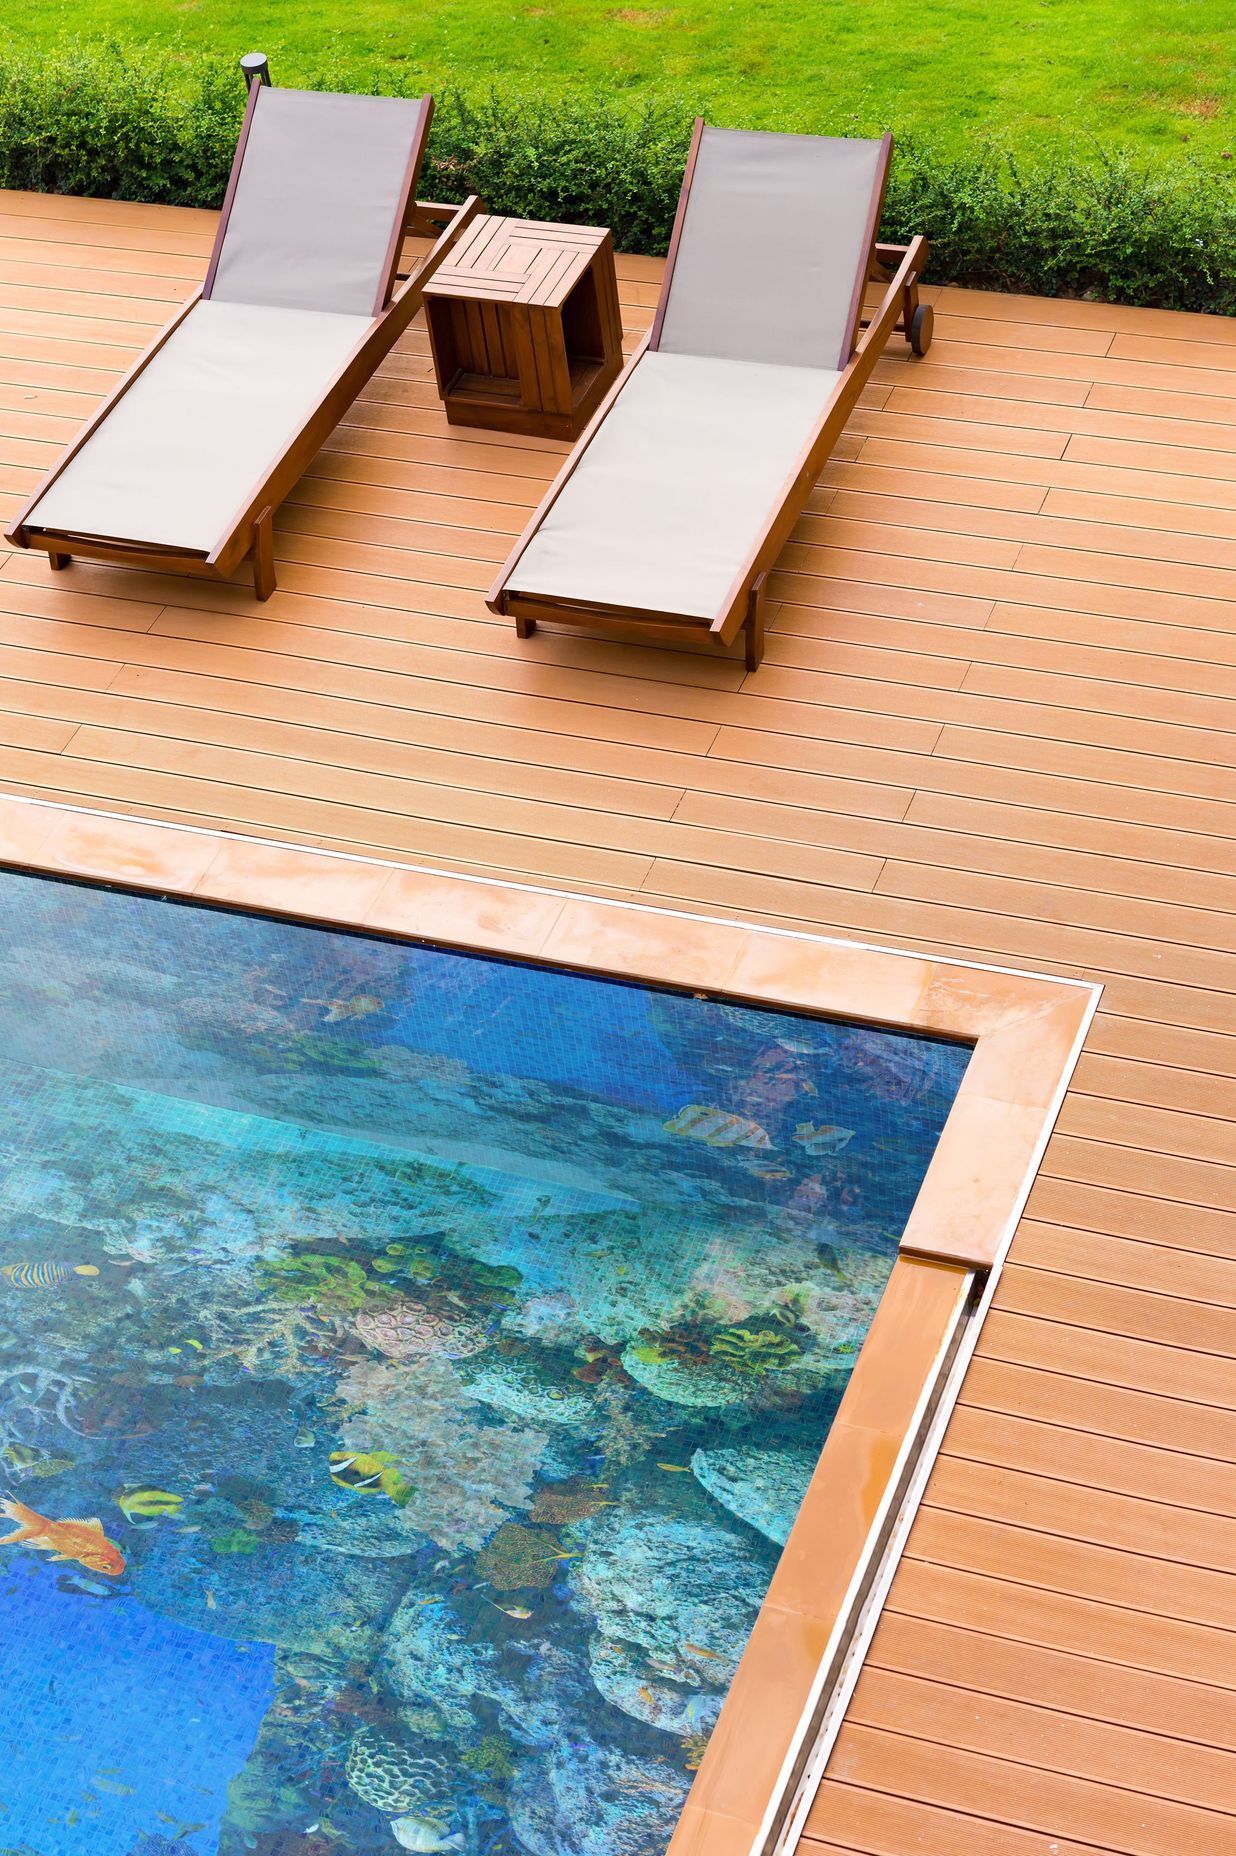 Digital images can now be printed directly onto tiles to create unique pool scapes.